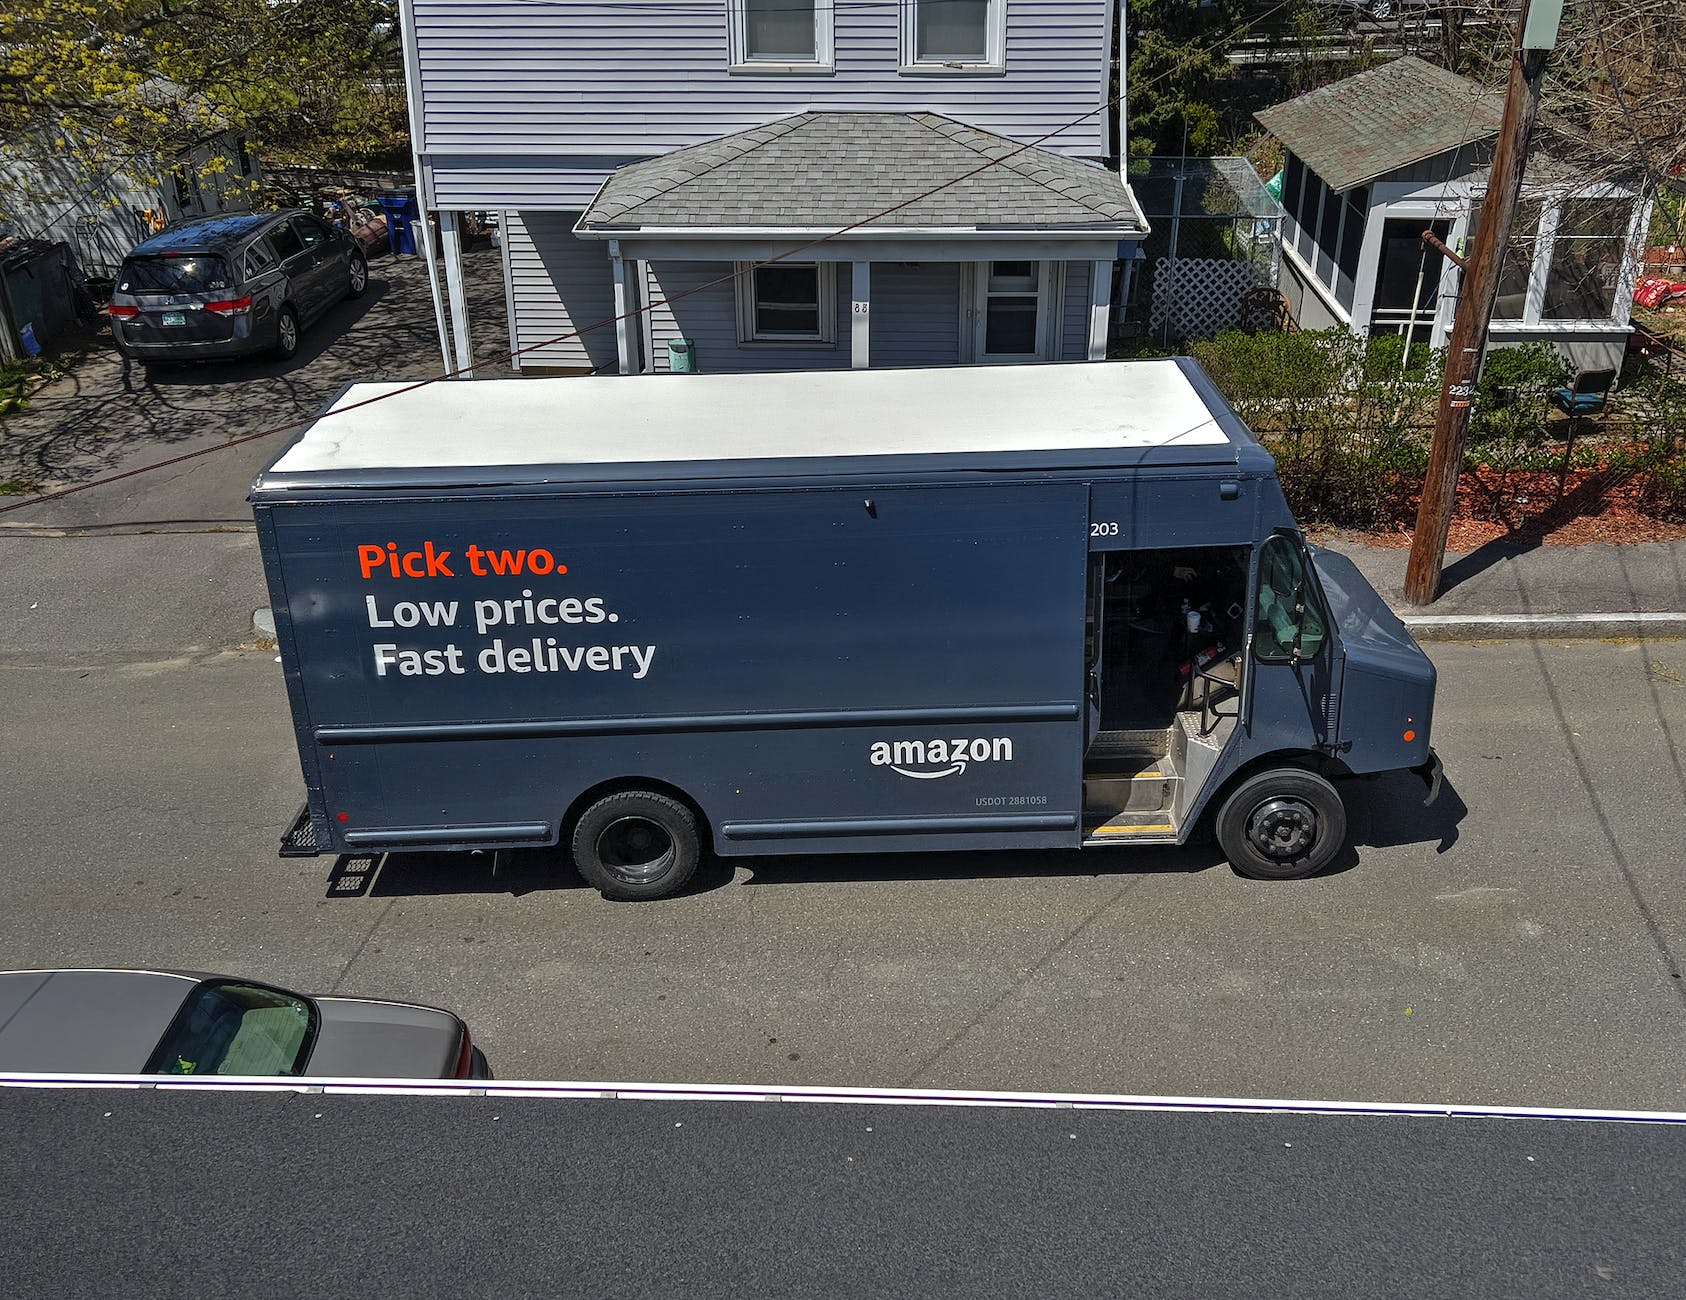 Understanding the Types of Box Truck Insurance for Amazon